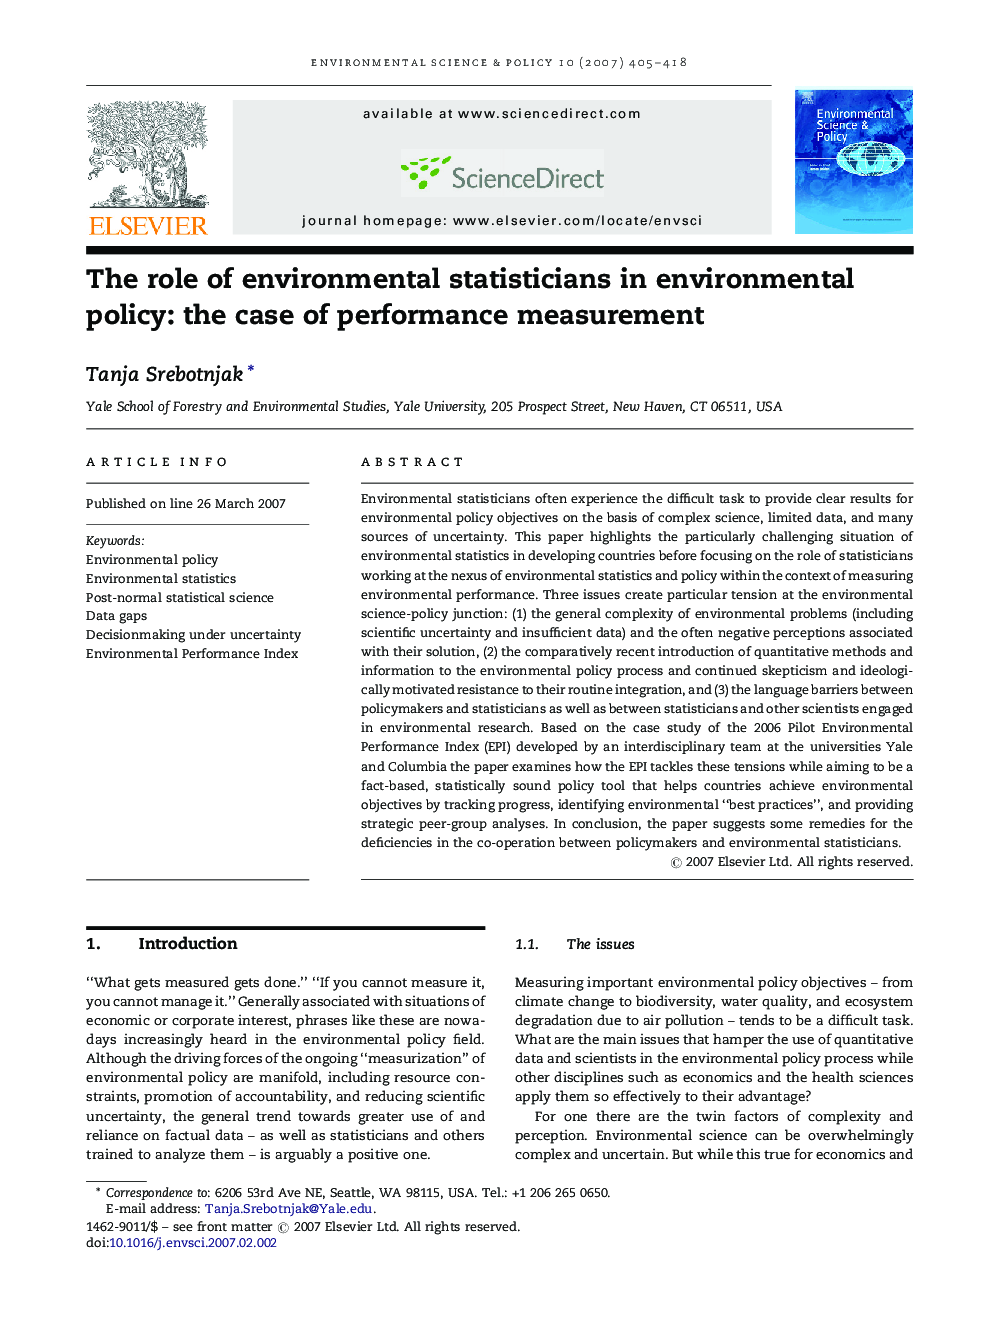 The role of environmental statisticians in environmental policy: the case of performance measurement